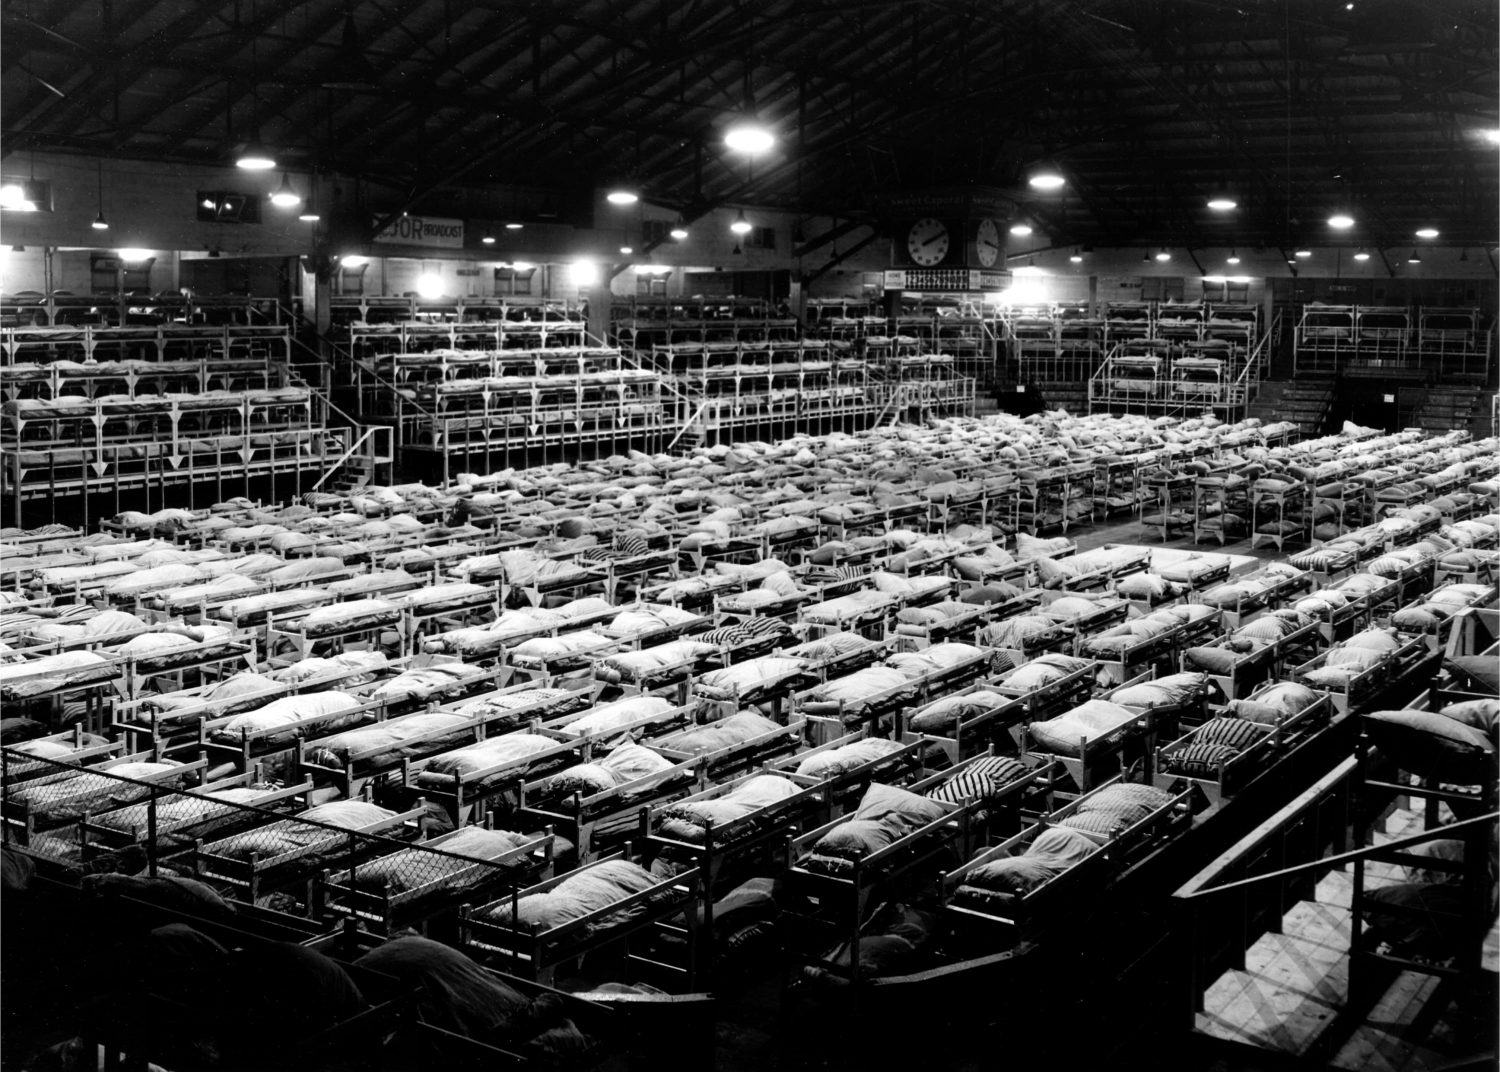 A temporary men’s dormitory for Japanese men at the Pacific National Exhibition in 1942.